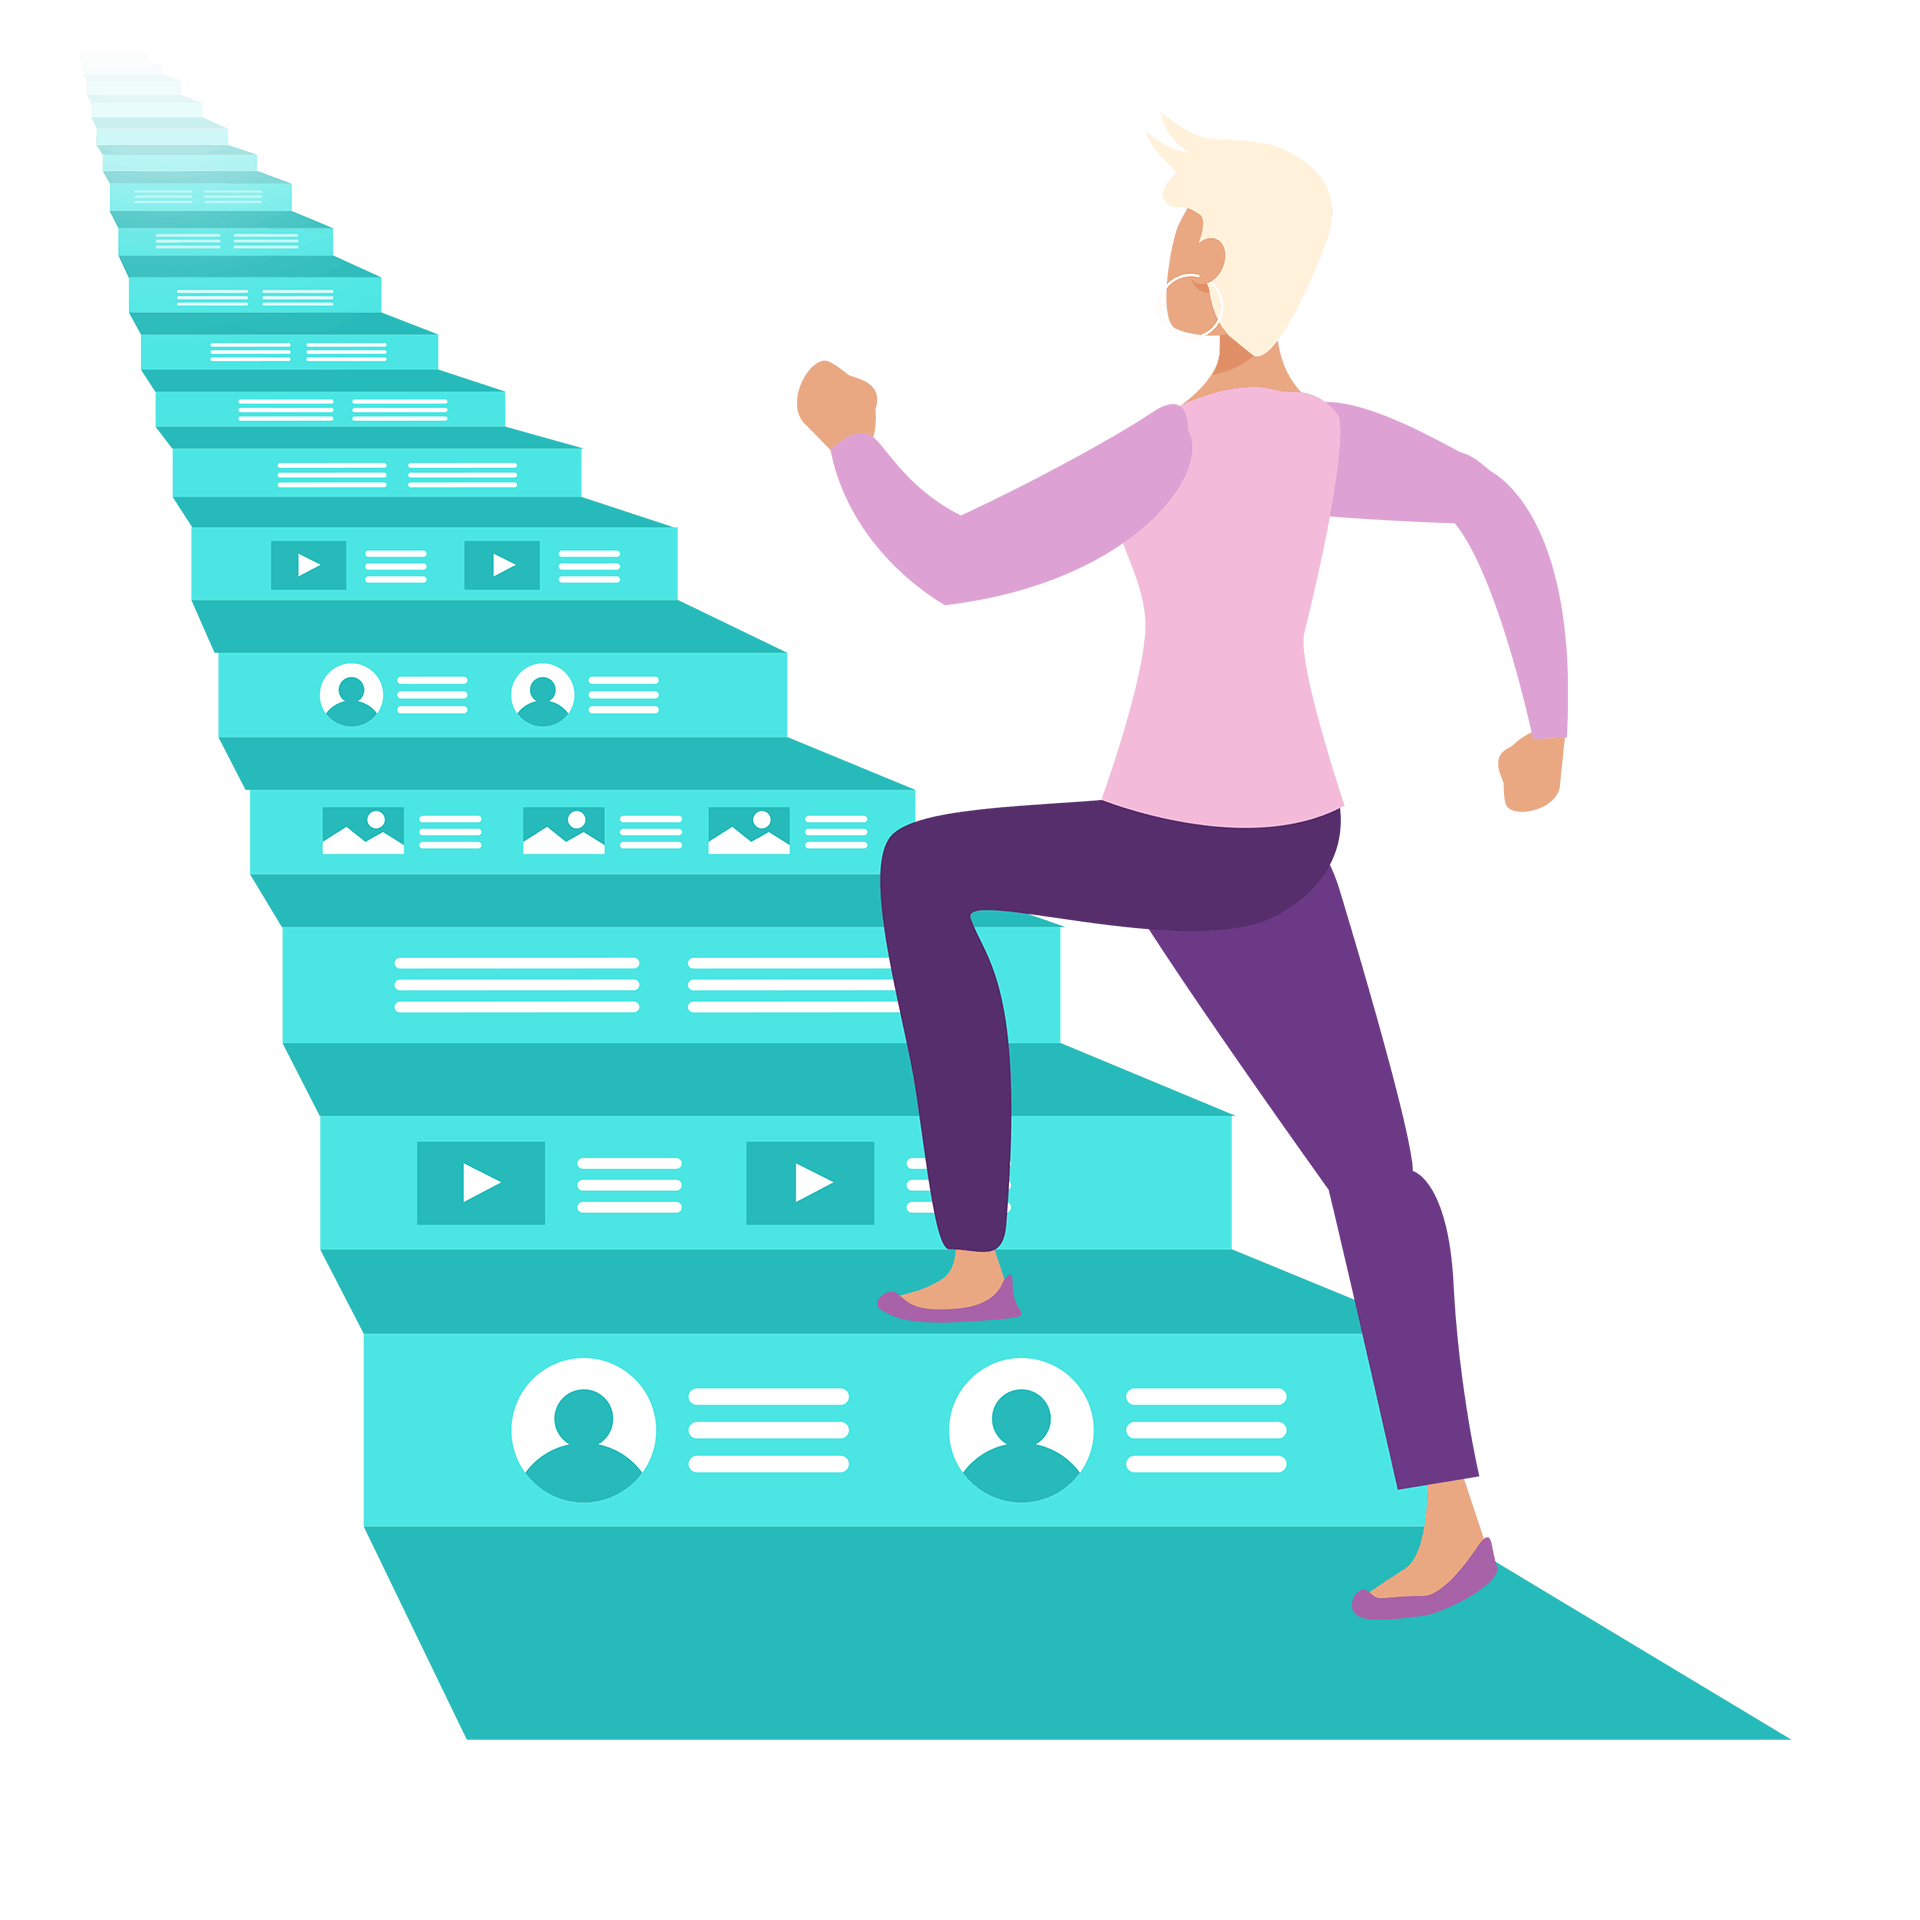 An illustration of a person walking up stairs